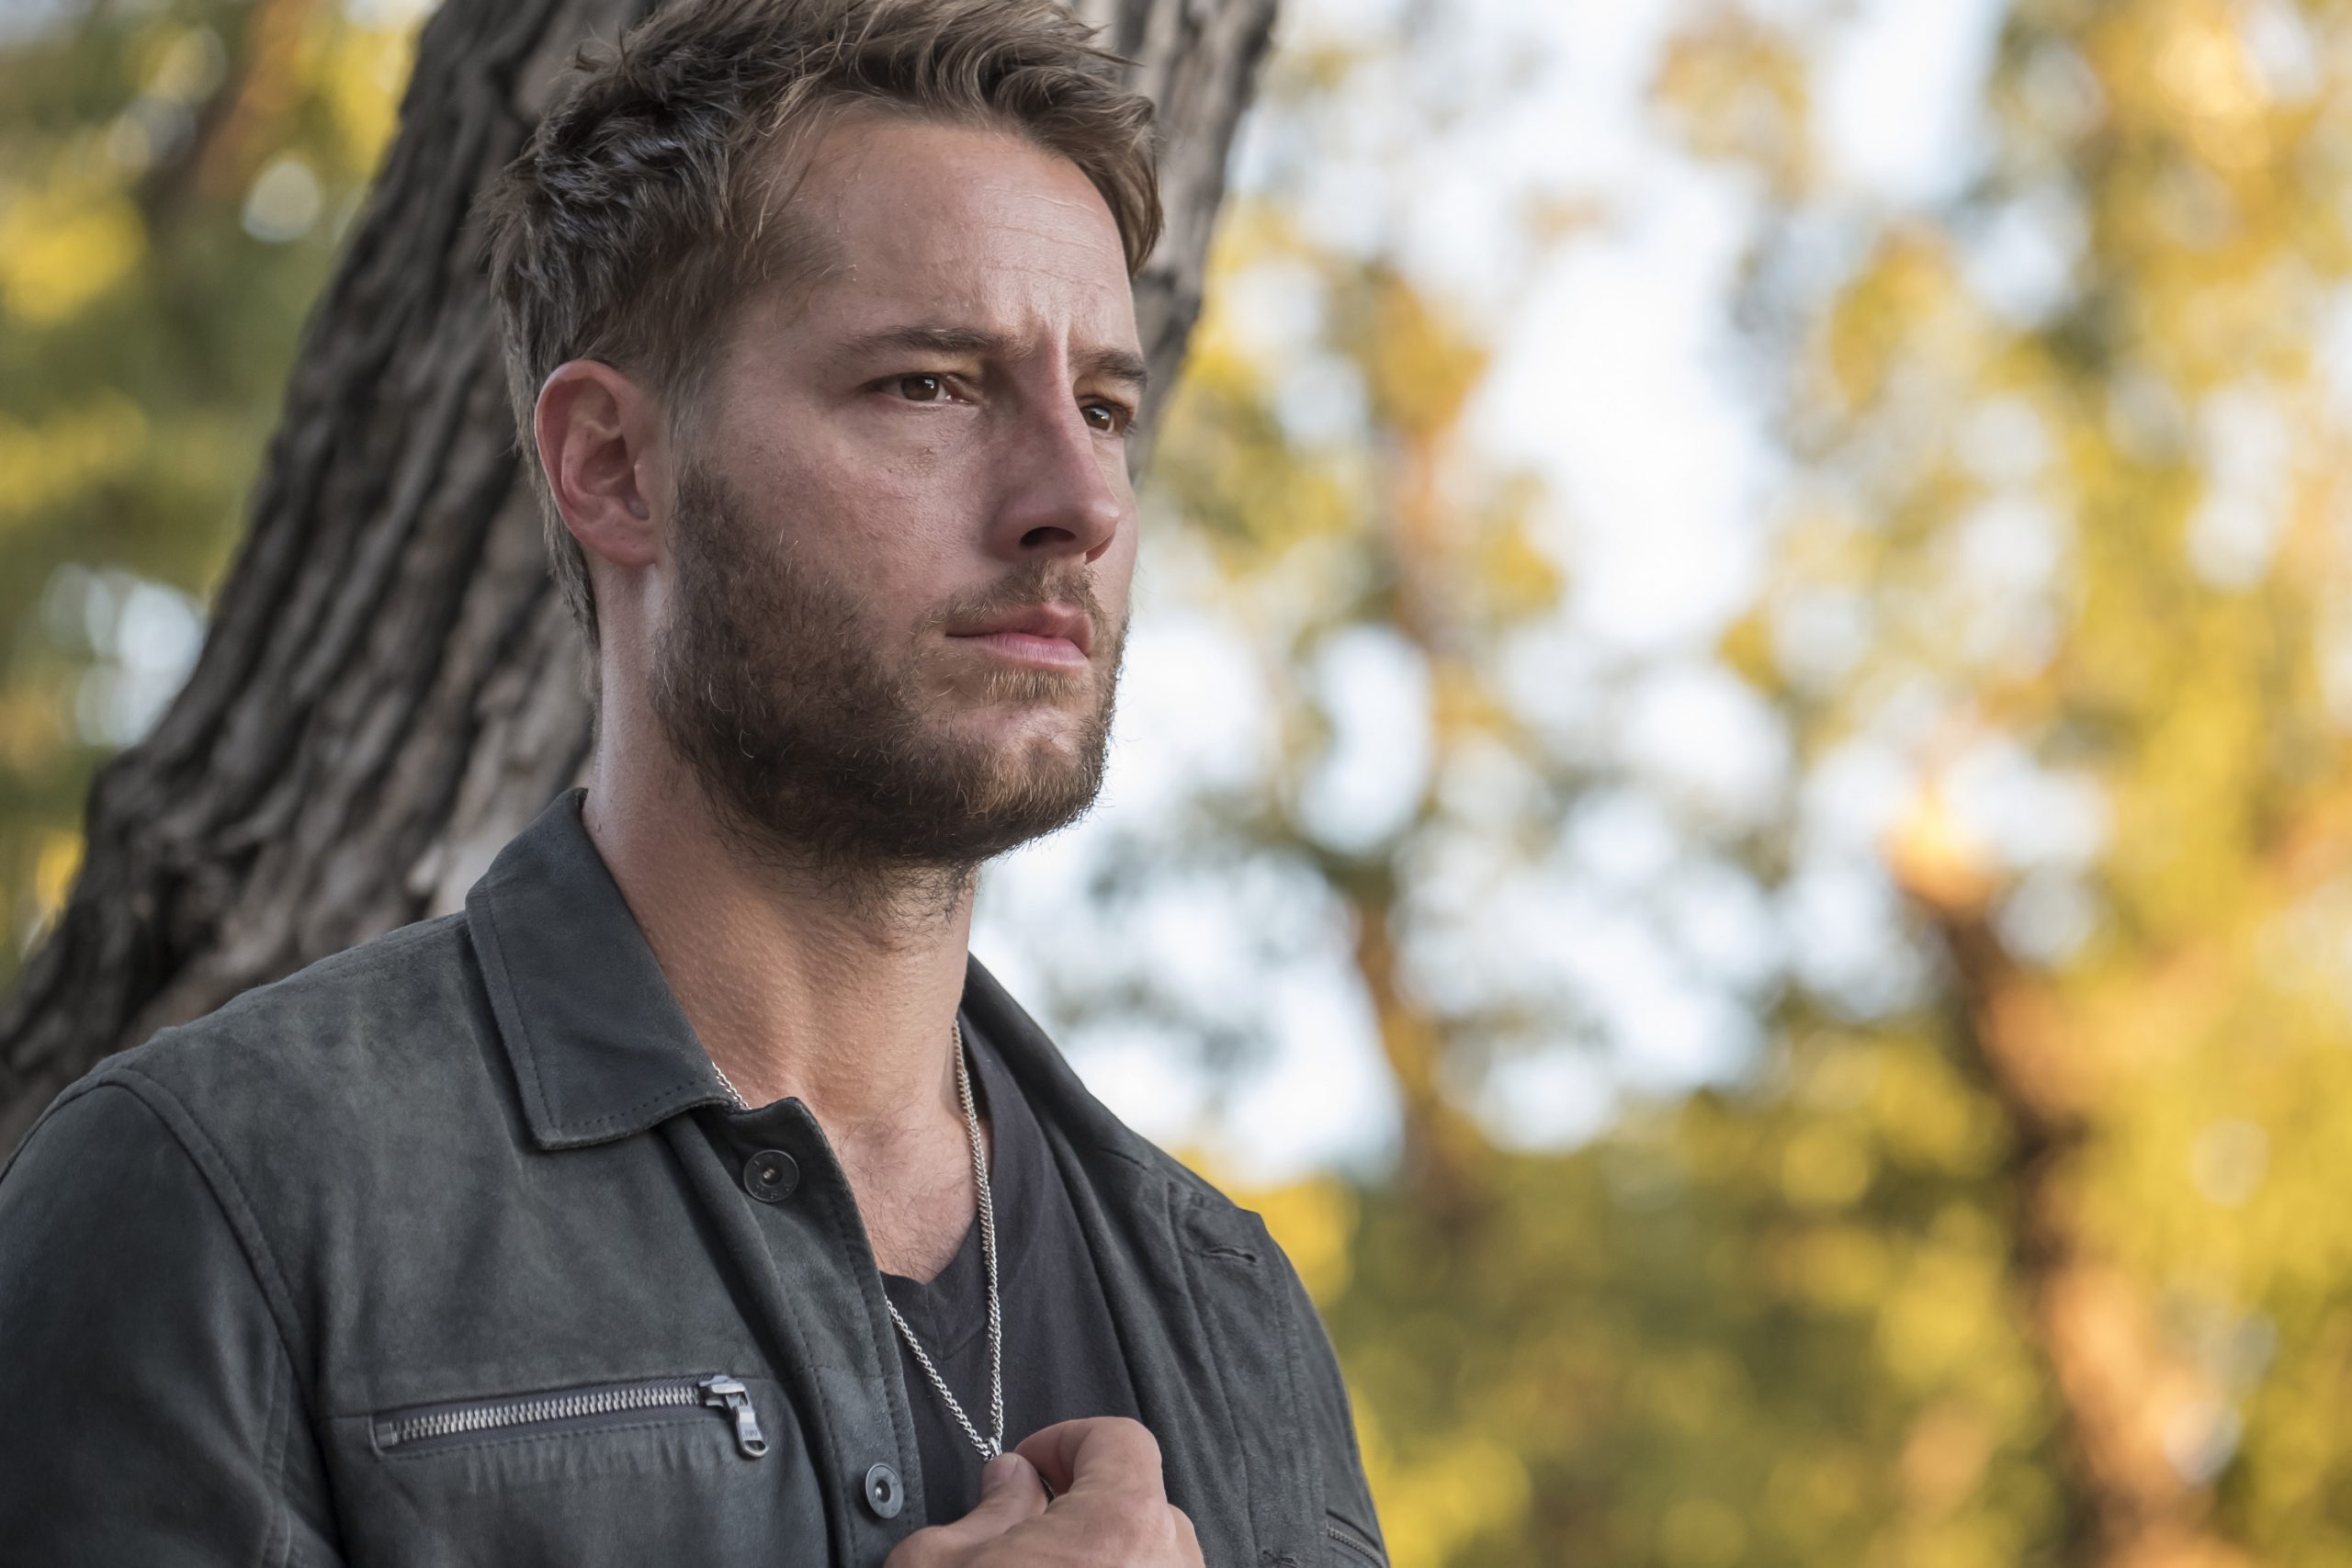 Justin Hartley, in character as Kevin Pearson in 'This Is Us' Season 2, wears a dark gray jacket over